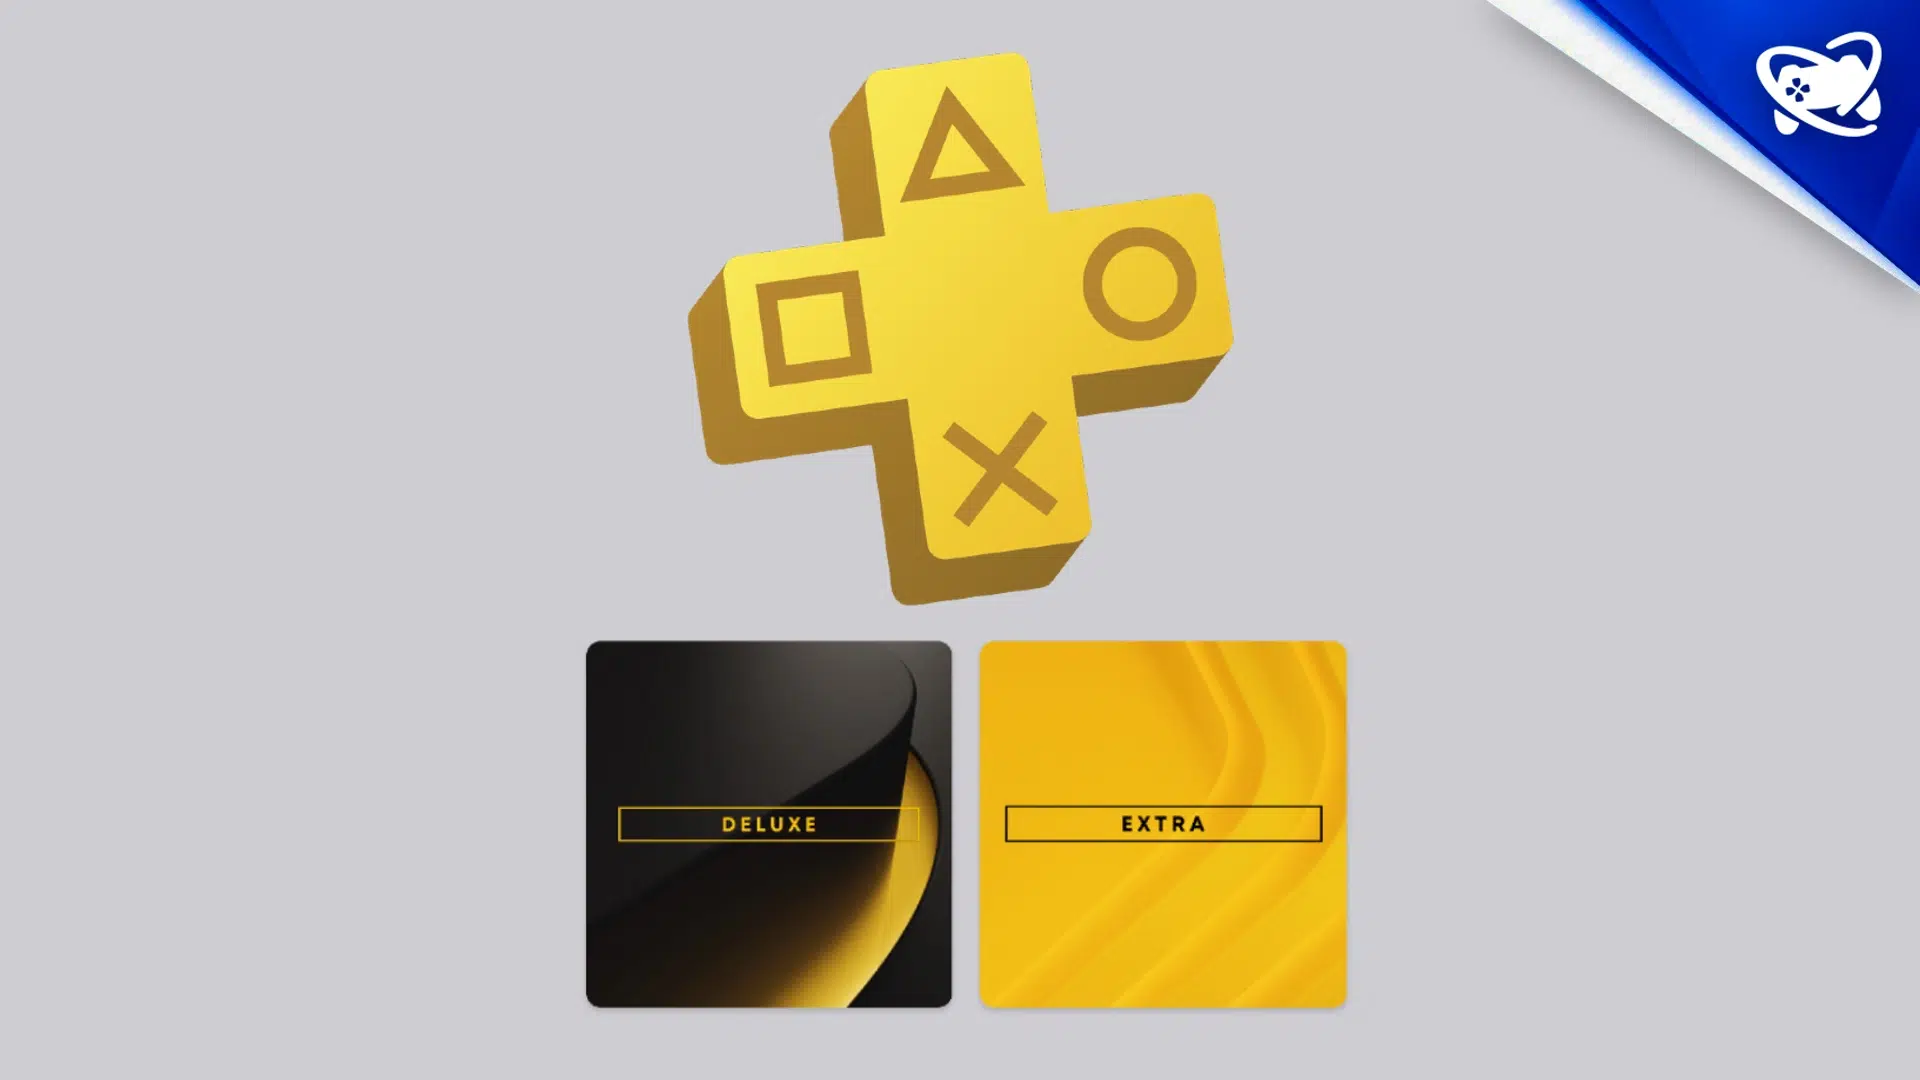 PS Plus Extra e Deluxe